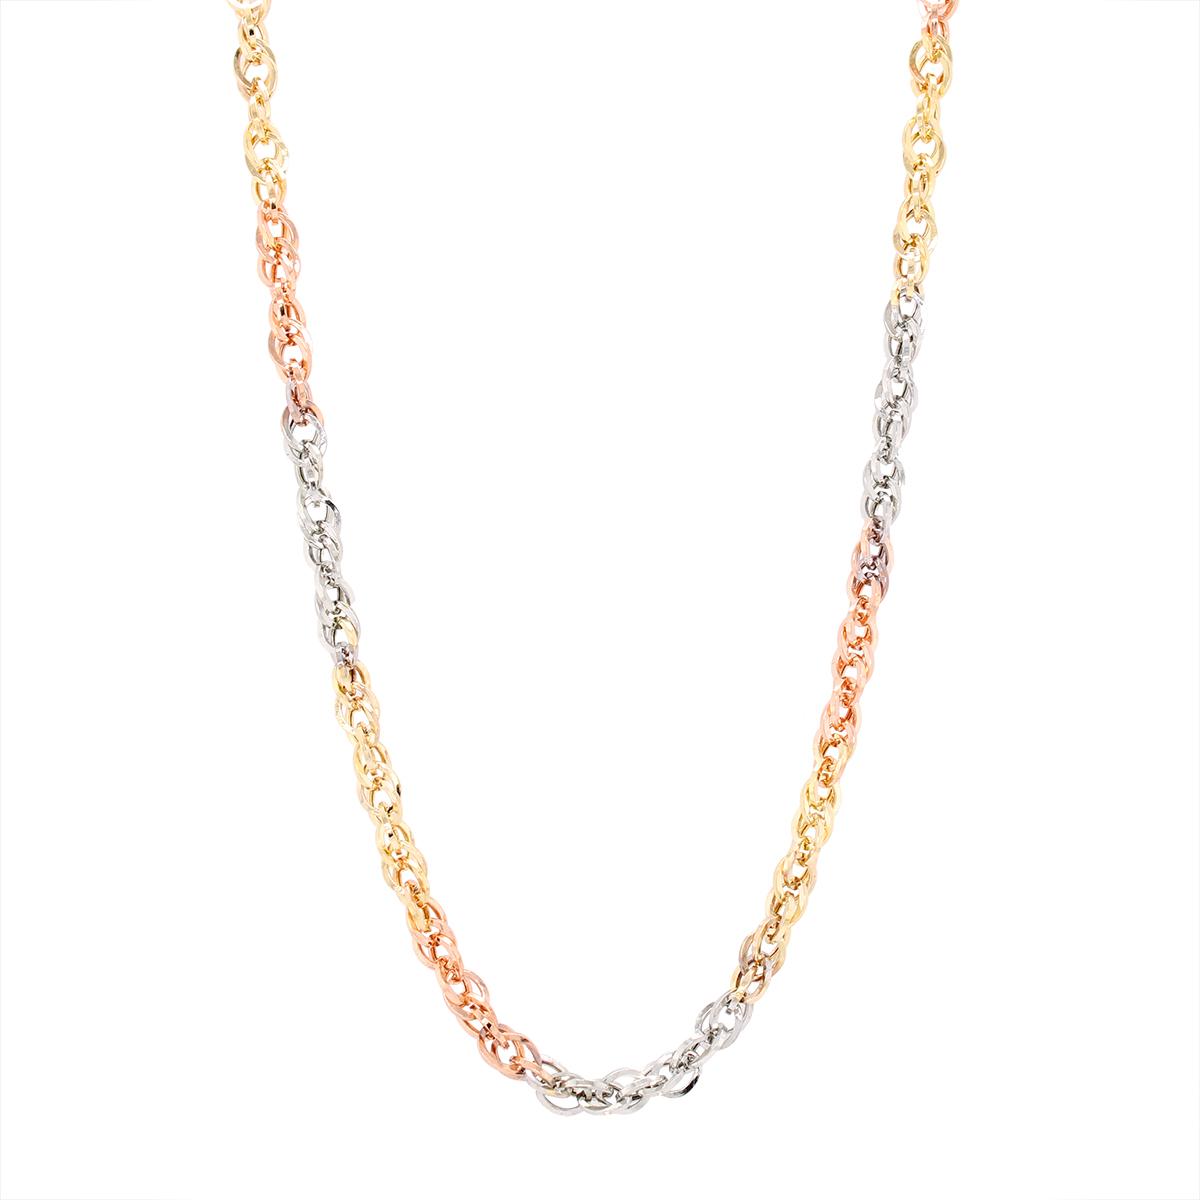 TRI-TONE GOLD NECKLACE WITH DOUBLE CABLE CHAIN STYLE LINKS, 24